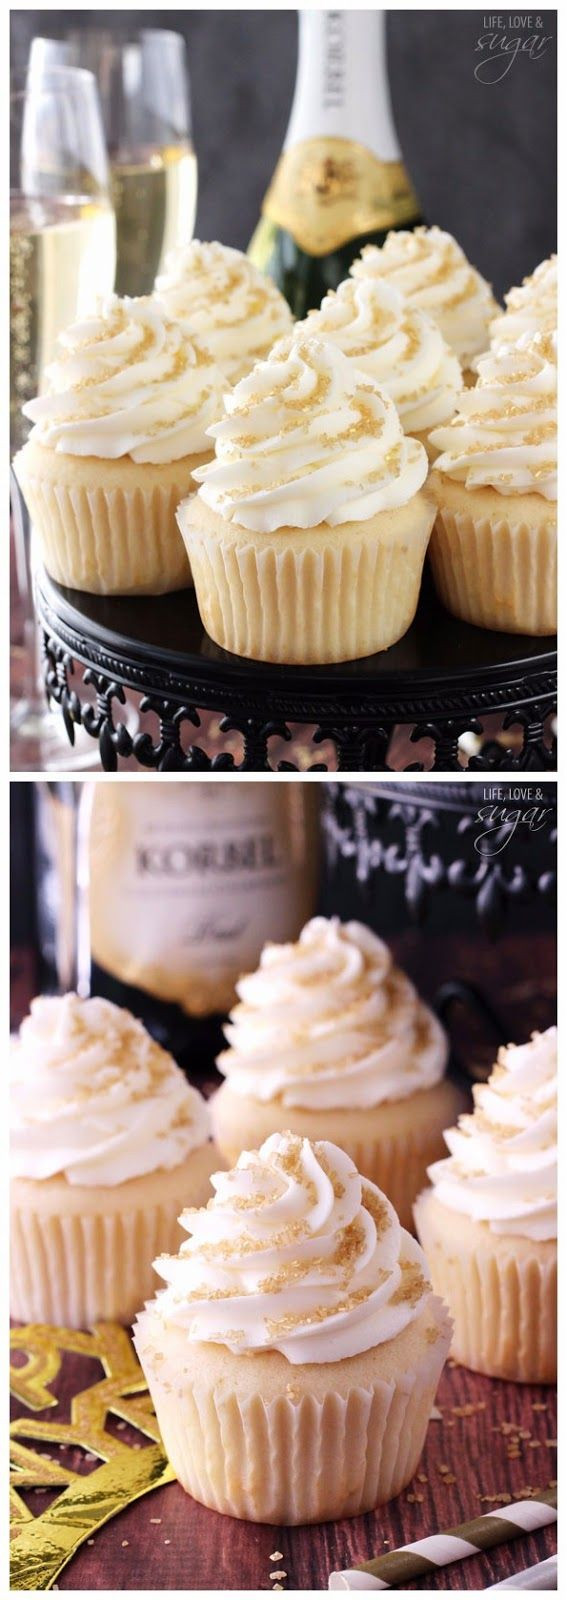 Cupcake Ideas For Engagement Party
 Champagne Cupcakes Don t Eat Them All